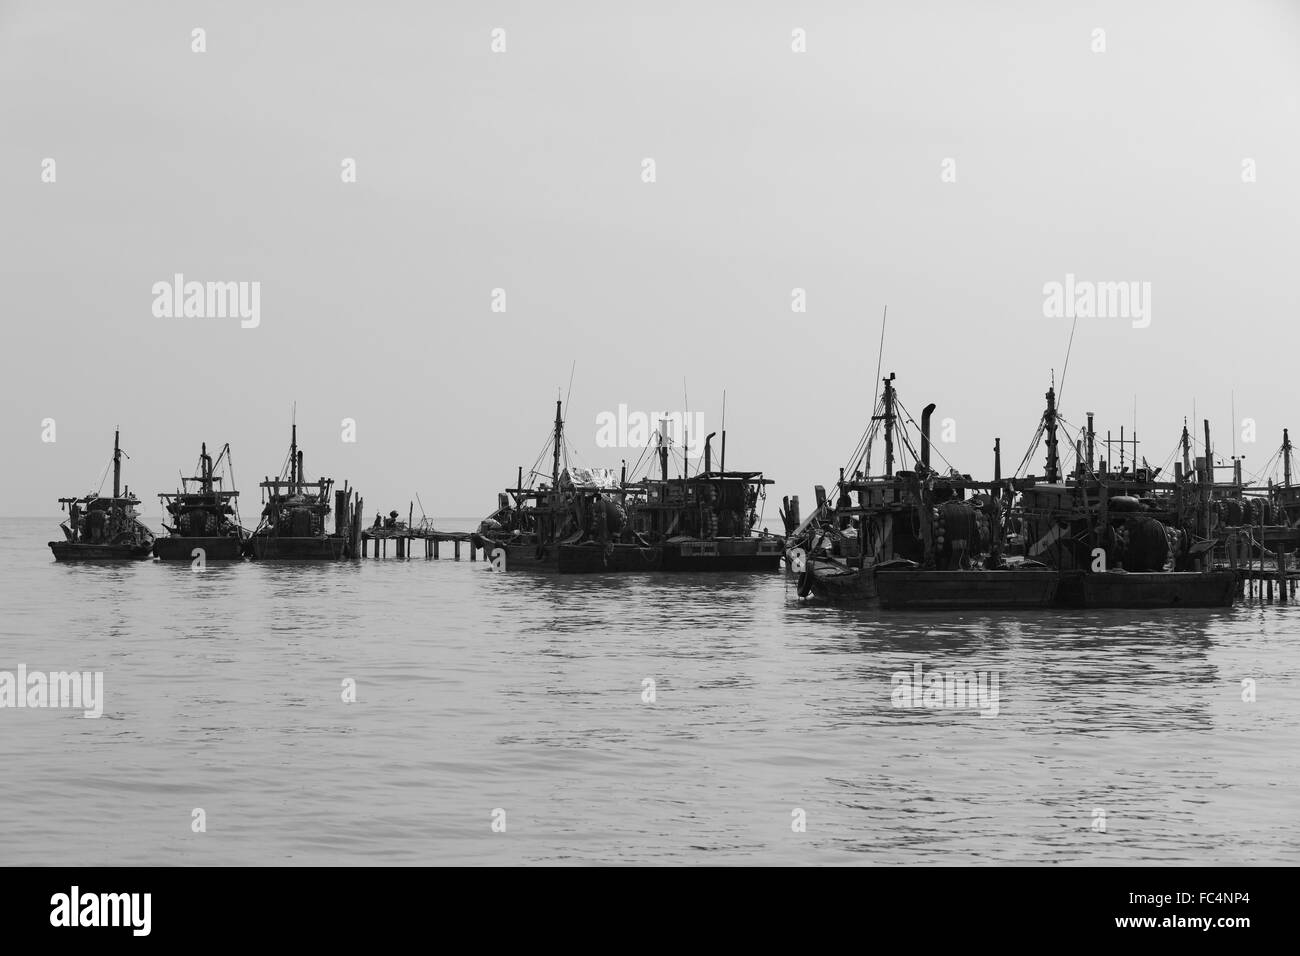 Monochrome collection of fishing boats alongside an old jetty at Teluk Bahang in Penang Malaysia. Stock Photo